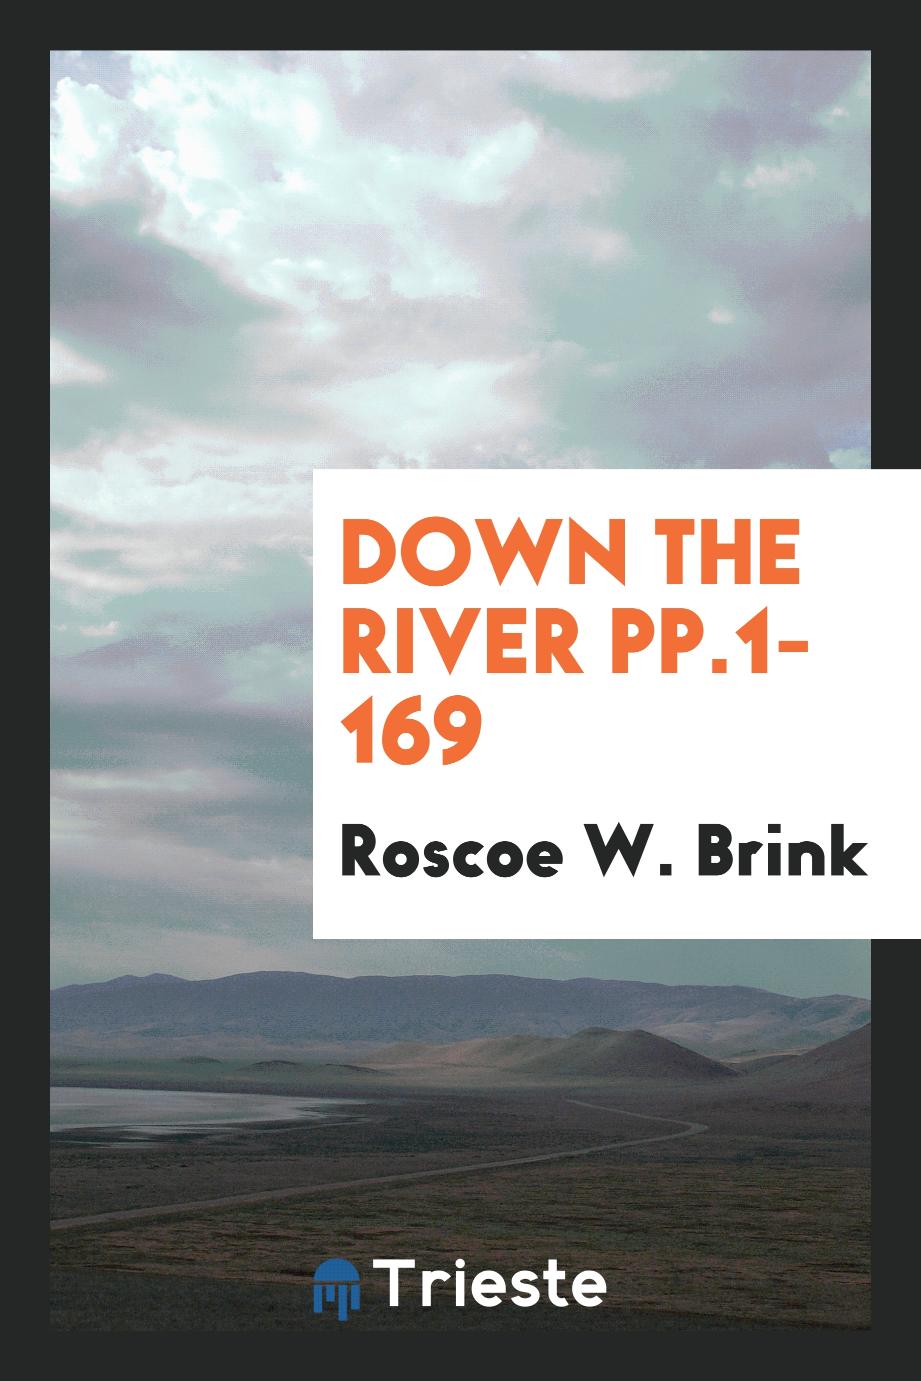 Roscoe W. Brink - Down the River pp.1-169